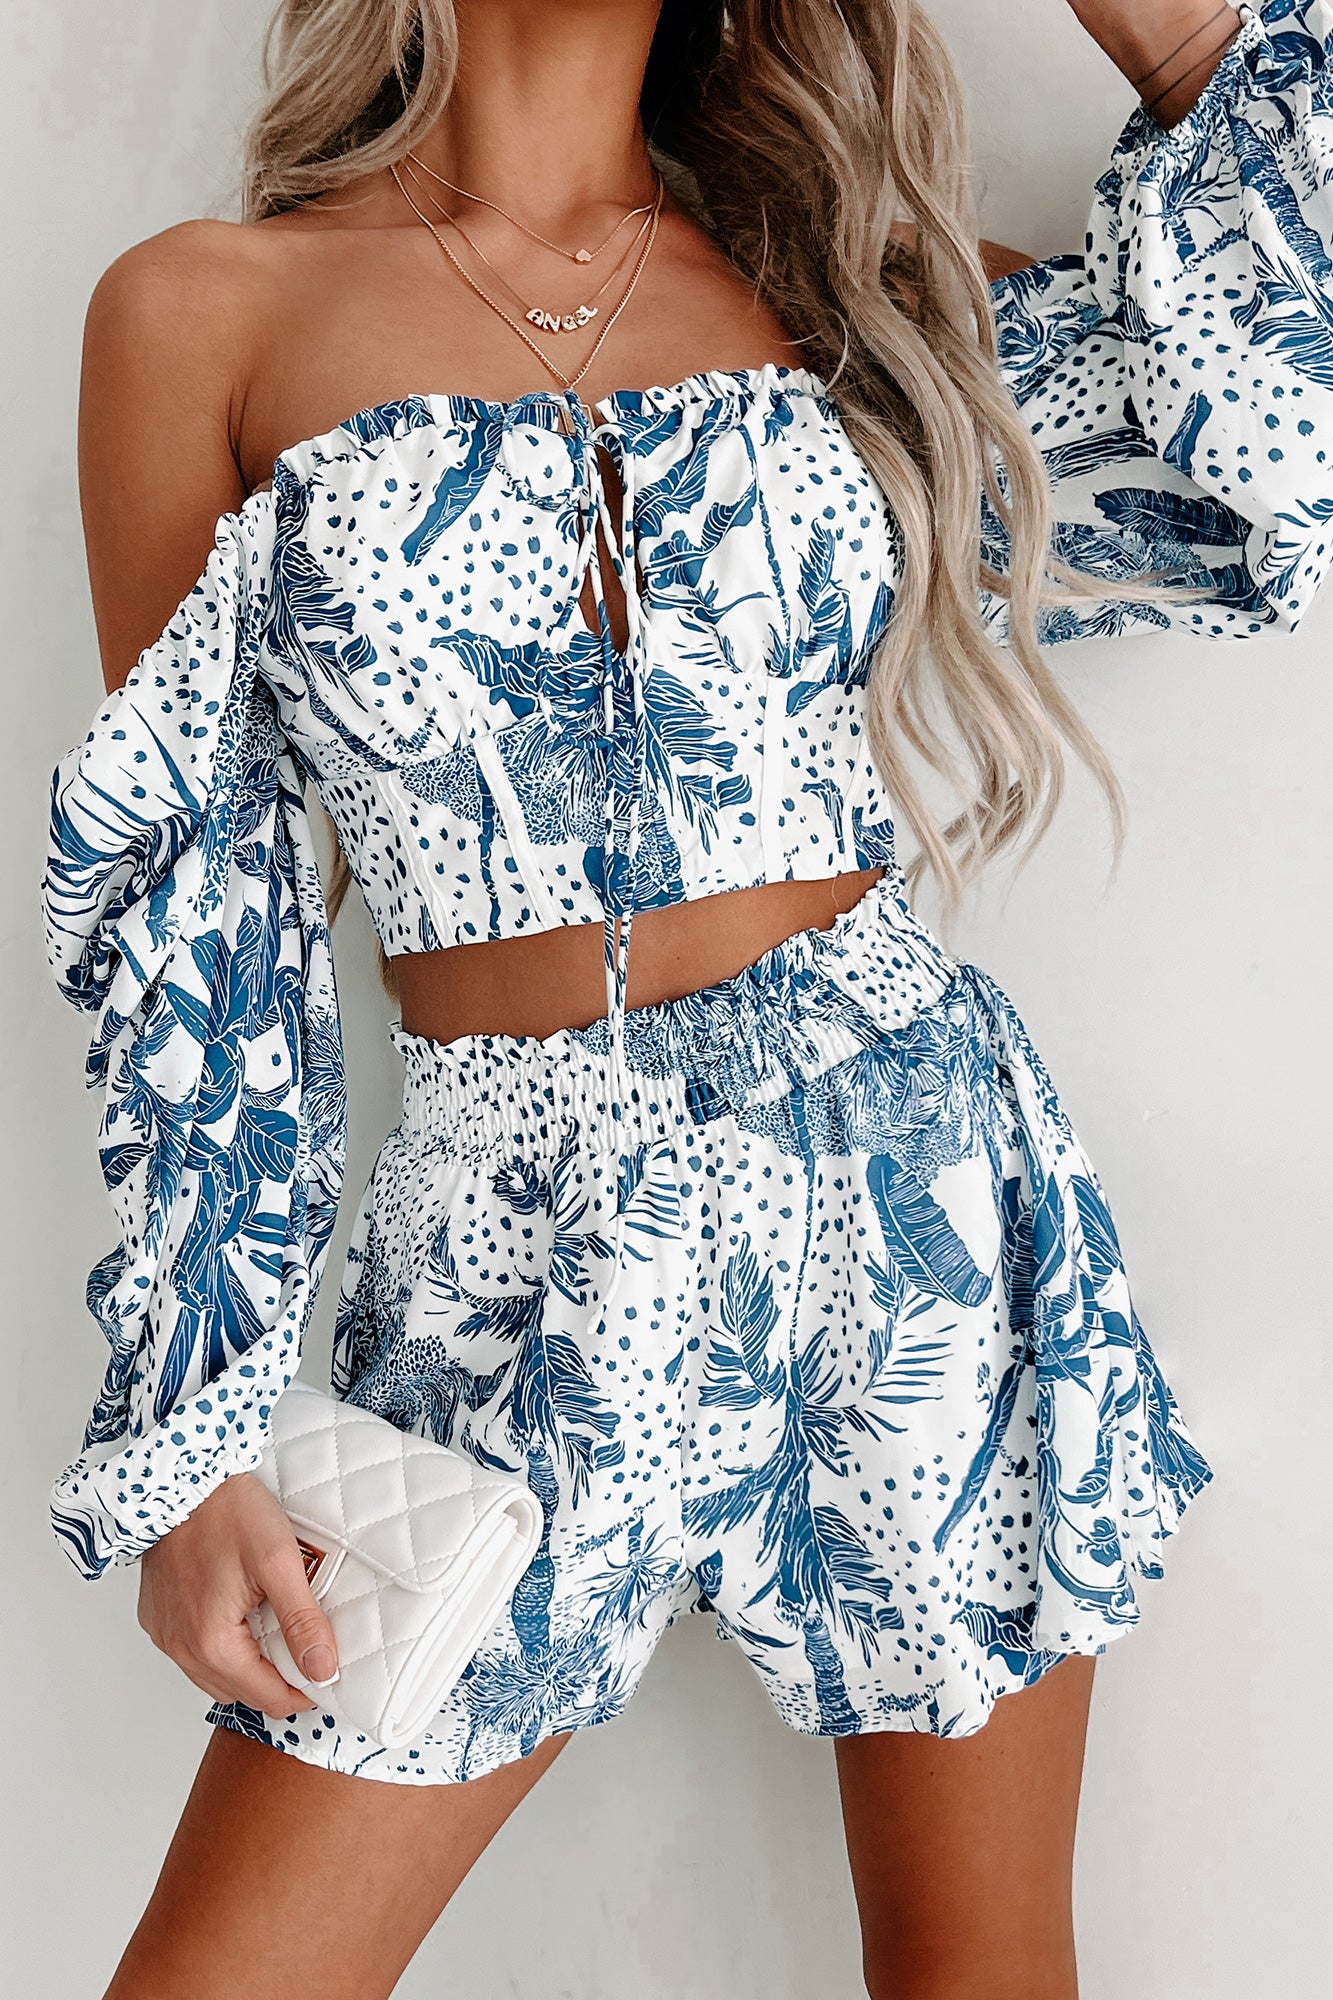 TWO PIECE NAVY FLORAL LACE-UP SHORTS SET